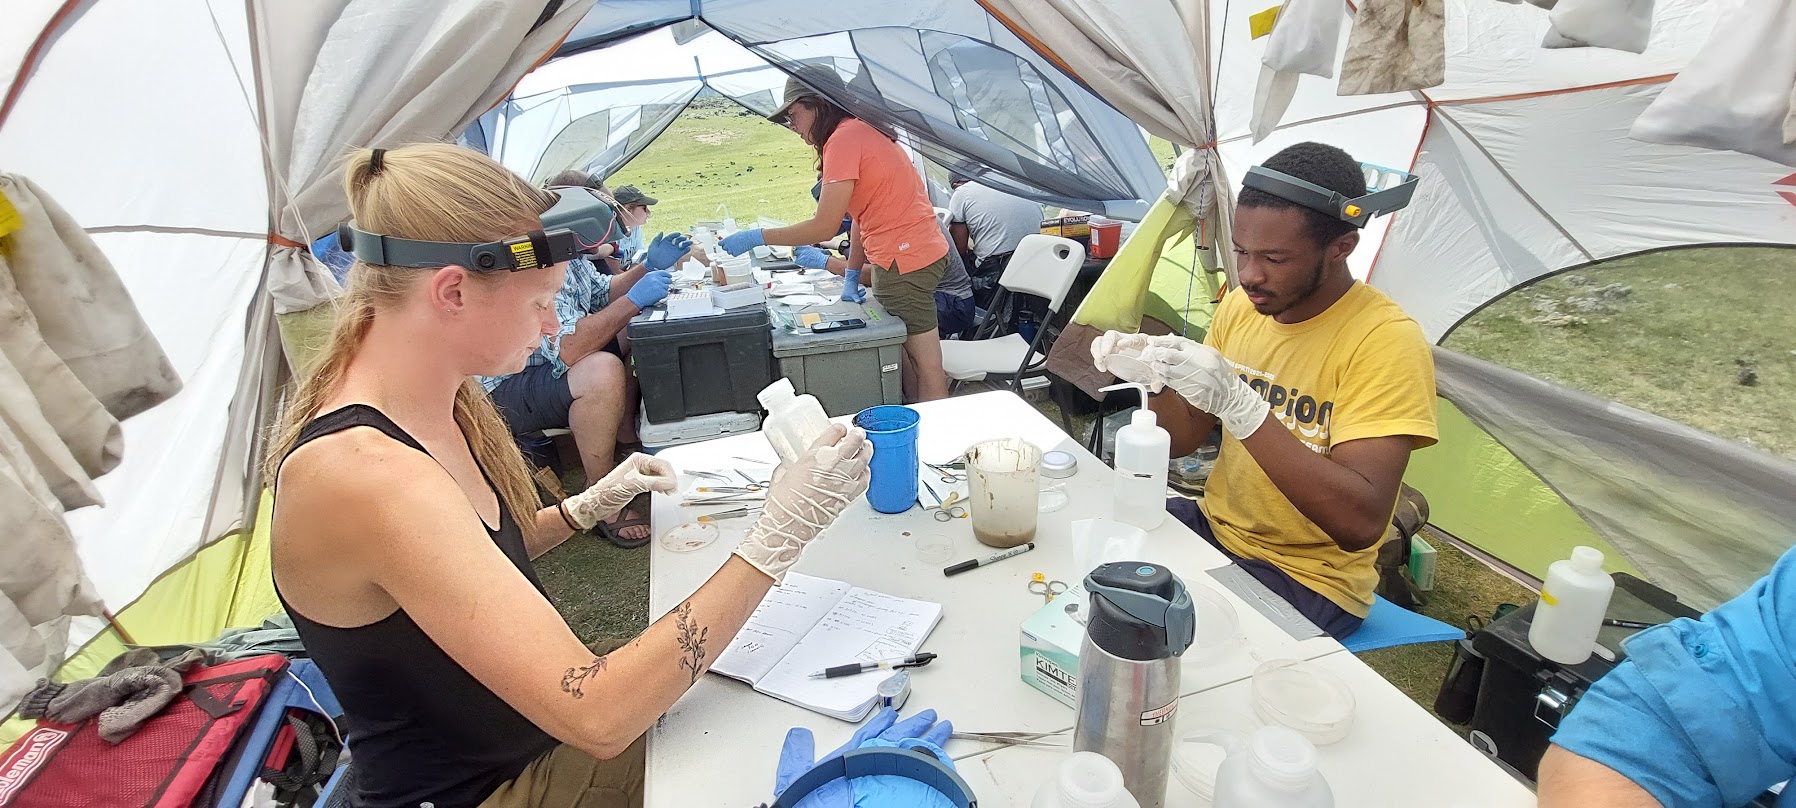 NMU Student Kenzie Grover on left in tent working with fellow students on biological samples